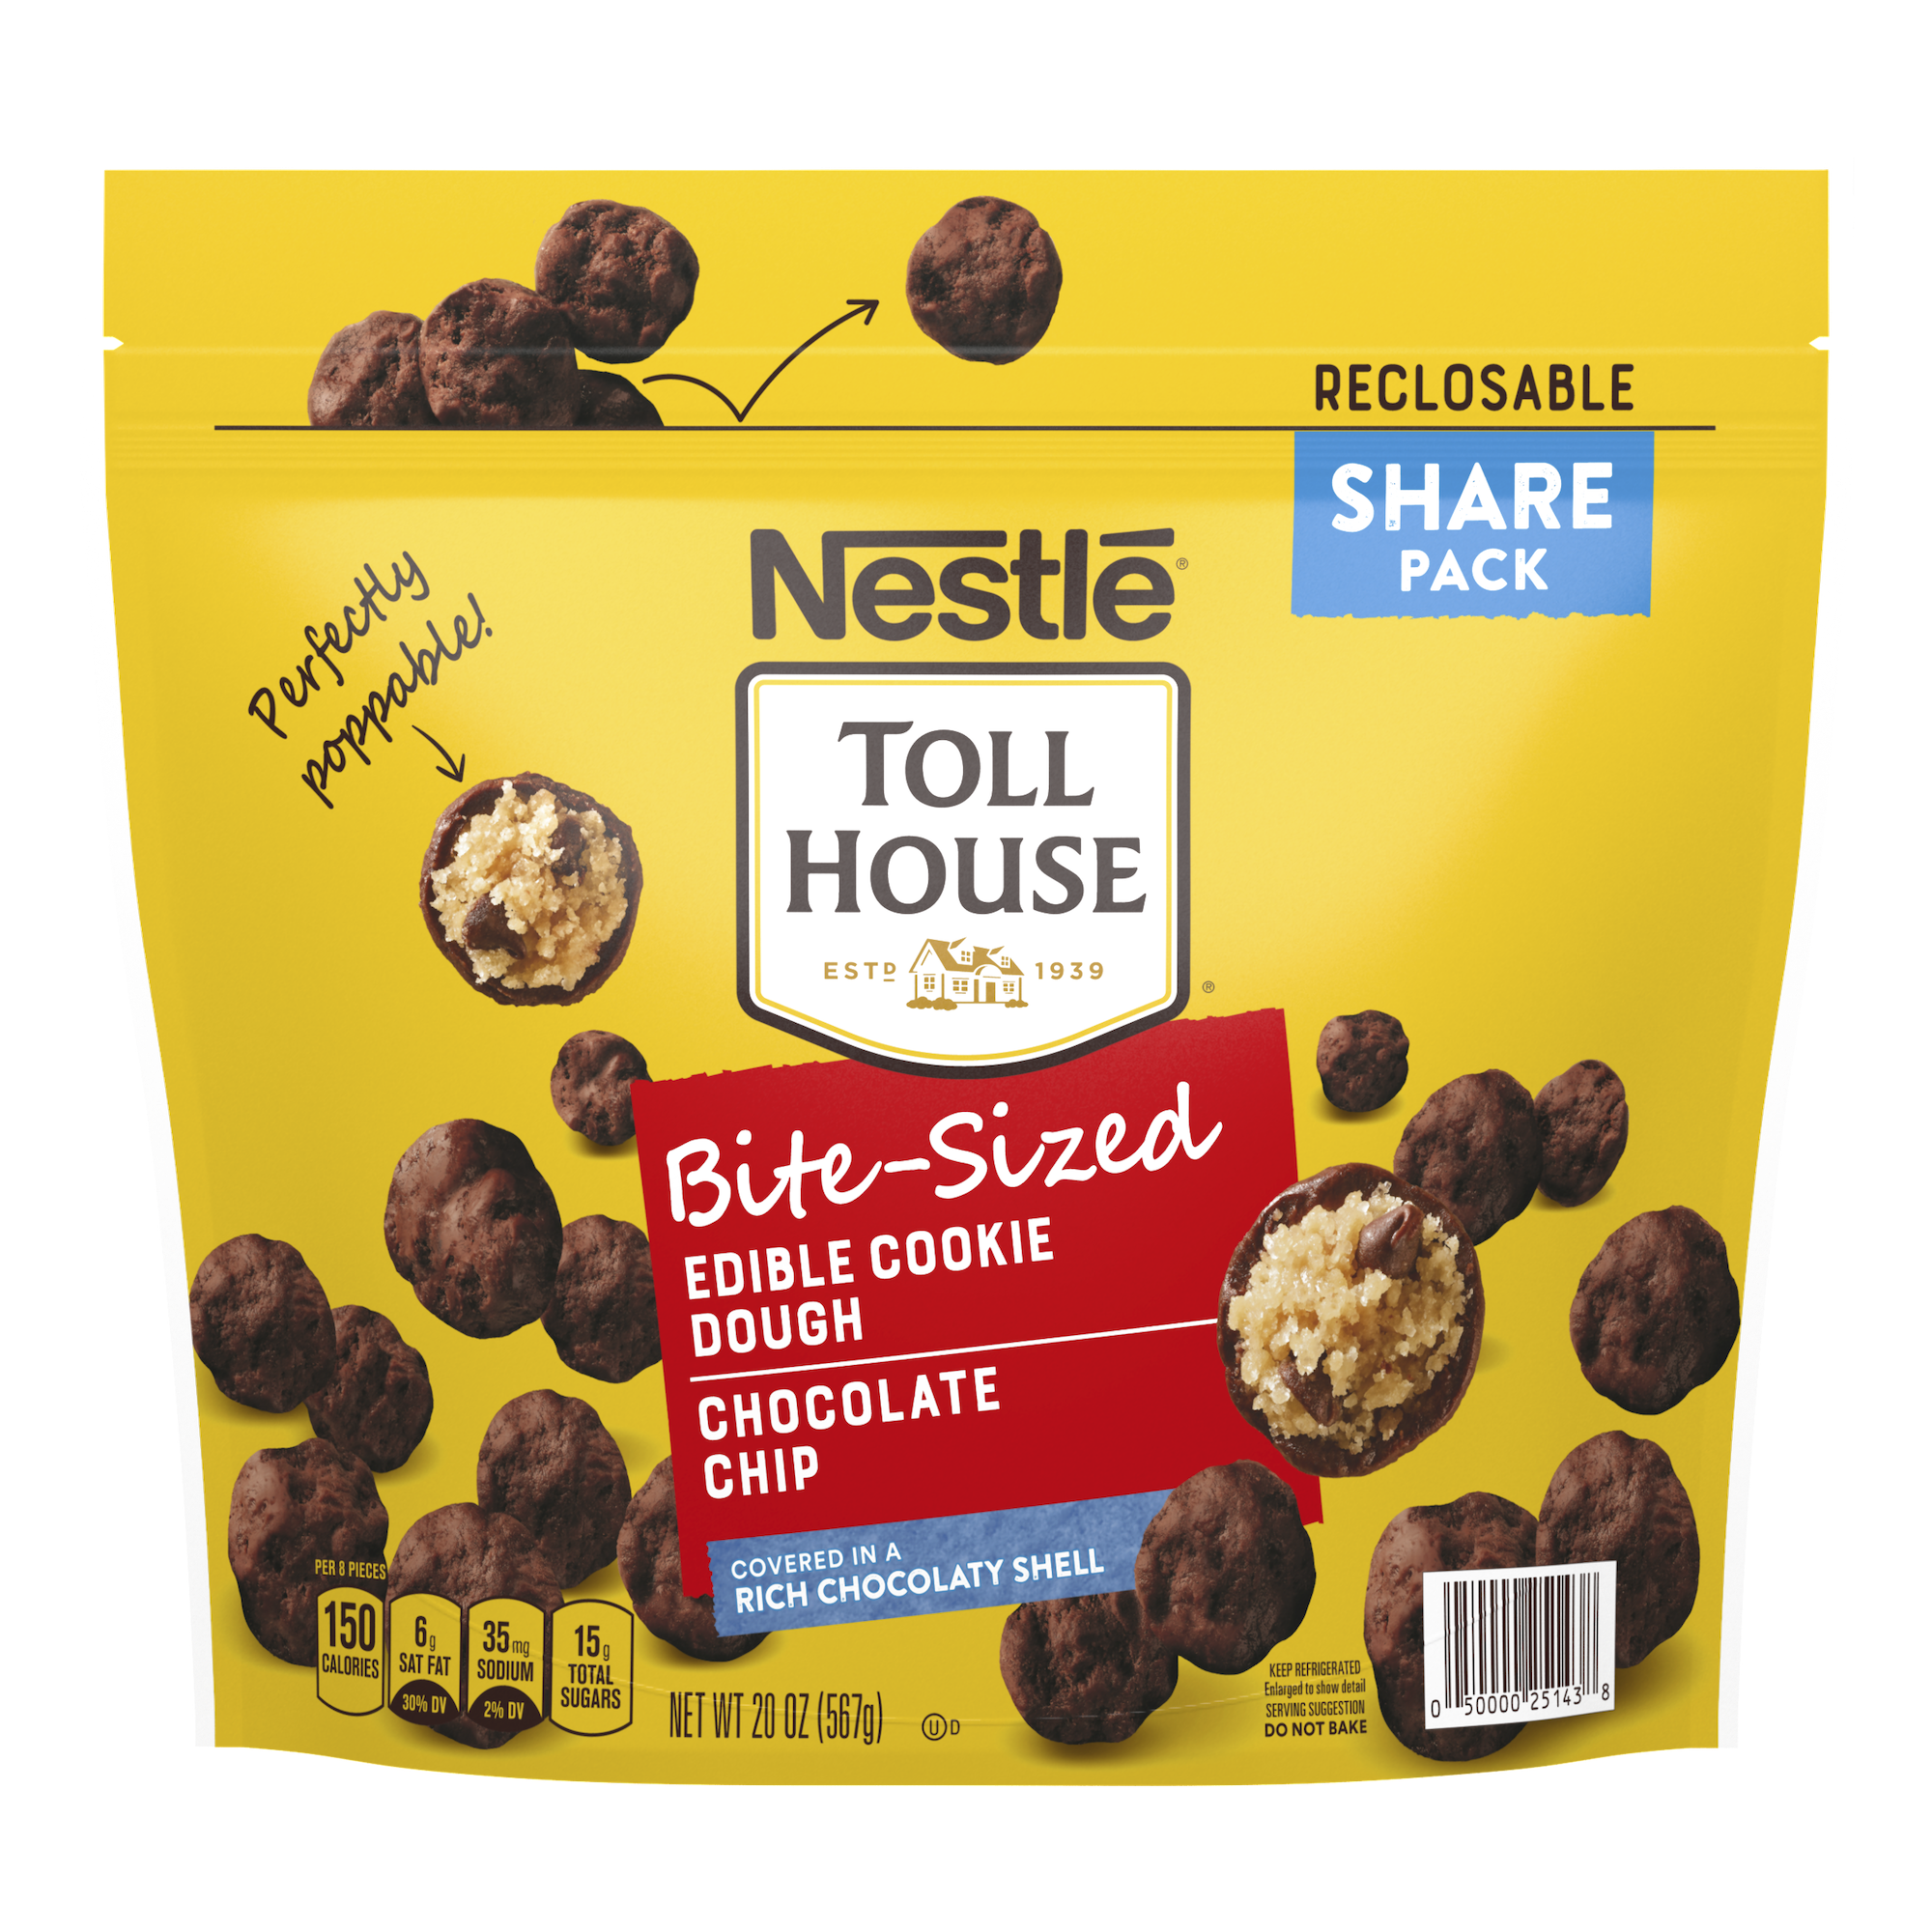 Nestle Toll House Edible Cookie Dough Bites Are Coming To Store Shelves Near You